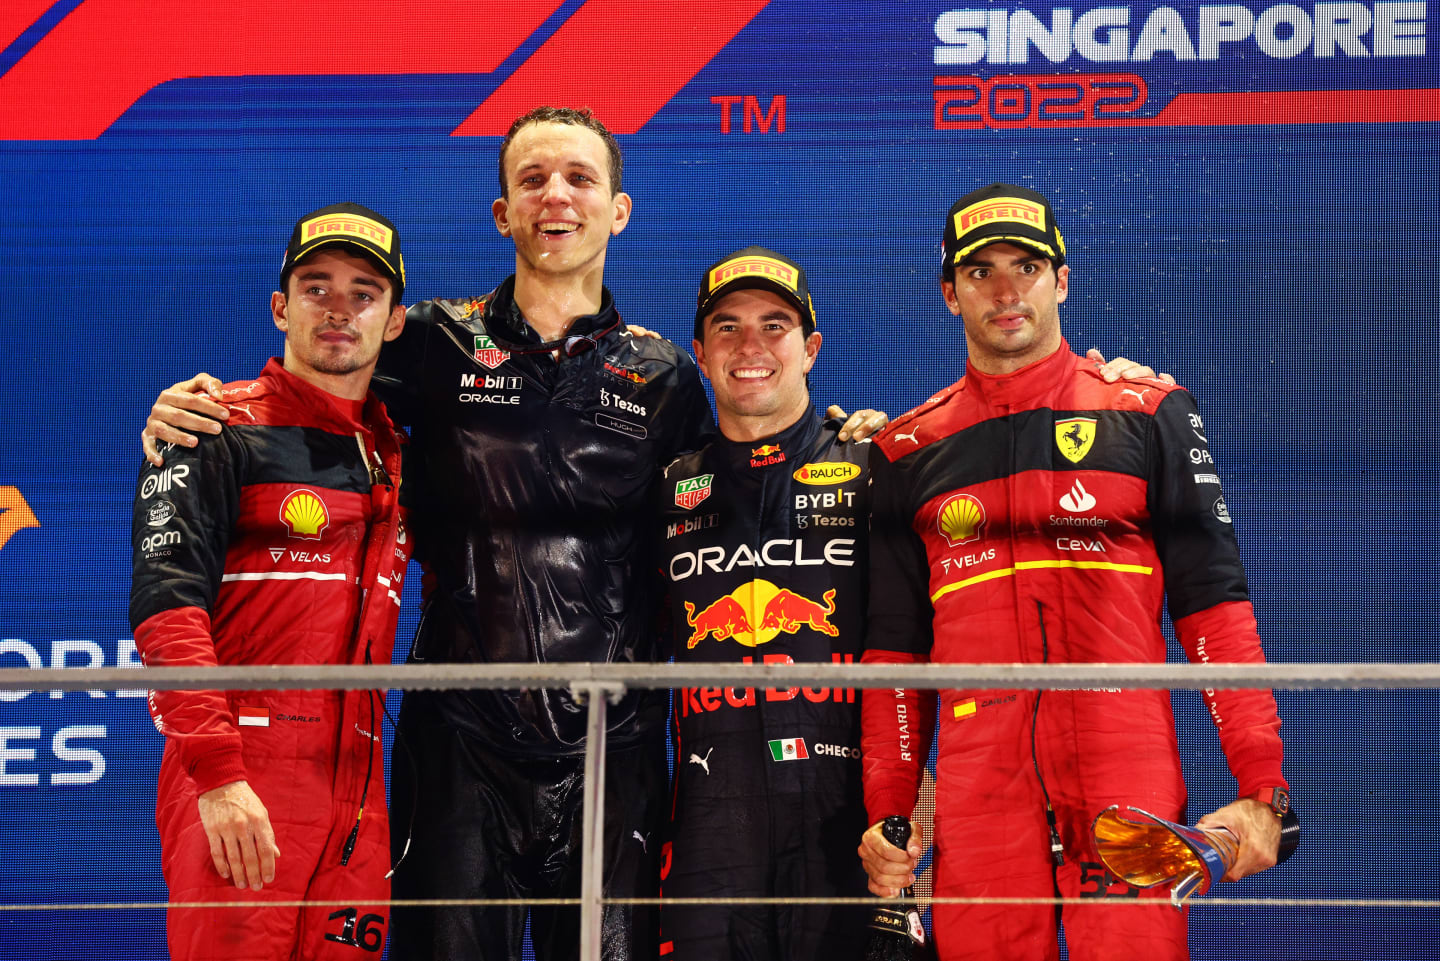 SINGAPORE, SINGAPORE - OCTOBER 02: Race winner Sergio Perez of Mexico and Oracle Red Bull Racing (second from right), Second placed Charles Leclerc of Monaco and Ferrari (L), Third placed Carlos Sainz of Spain and Ferrari (R) and Red Bull Racing race engineer Hugh Bird (second from left) celebrate on the podium during the F1 Grand Prix of Singapore at Marina Bay Street Circuit on October 02, 2022 in Singapore, Singapore. (Photo by Clive Rose/Getty Images,)